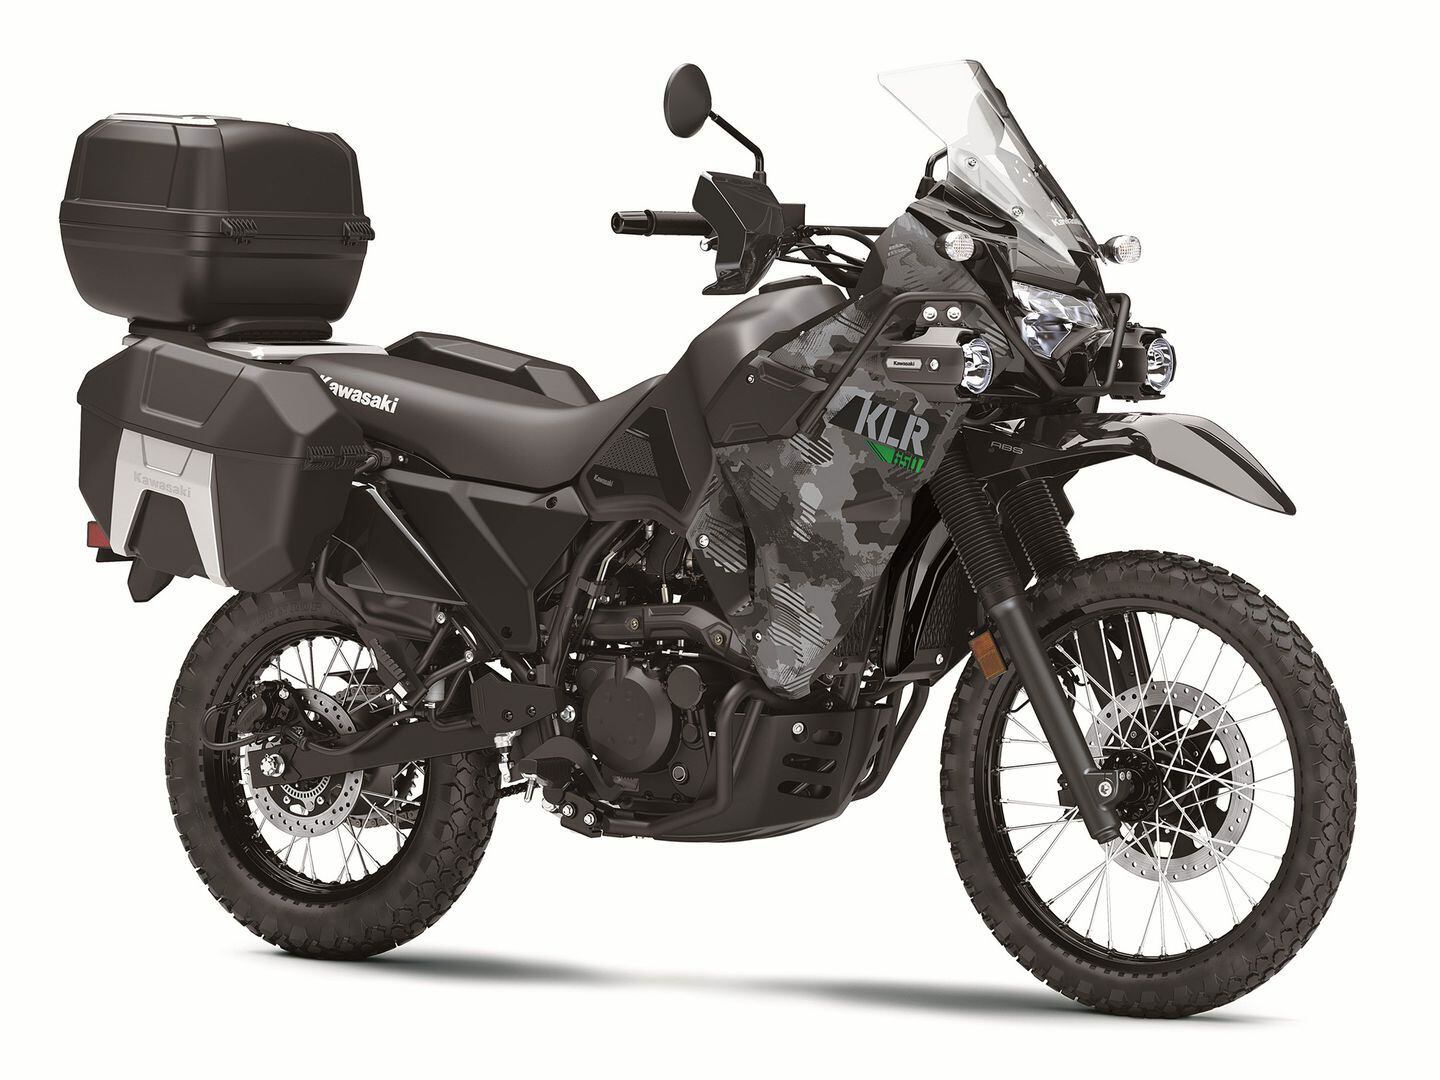 The 2022 KLR650 Adventurer (shown in Cypher Camo Gray) comes with side cases, fog lamps, frame sliders, and more. The top case is standard on the KLR650 Traveler model.